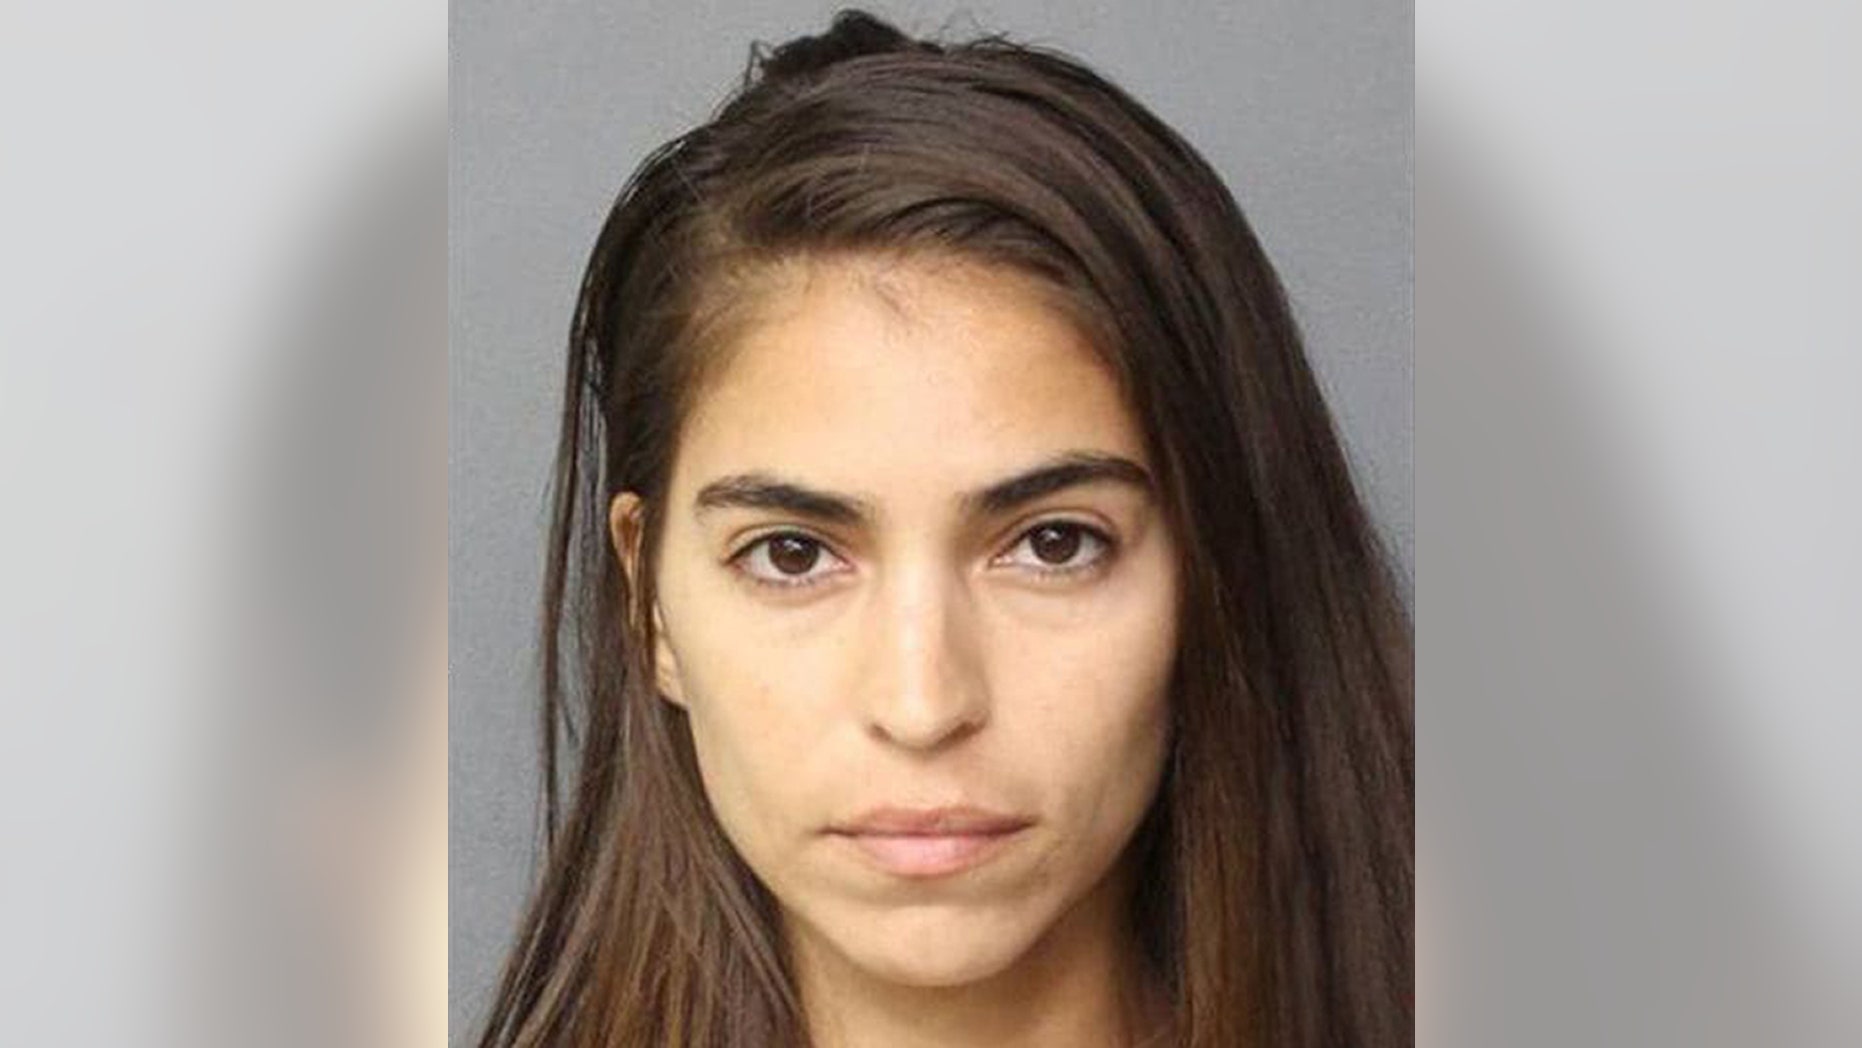 Antonella Barba was arrested Thursday for drug charges in Virginia, according to a report.